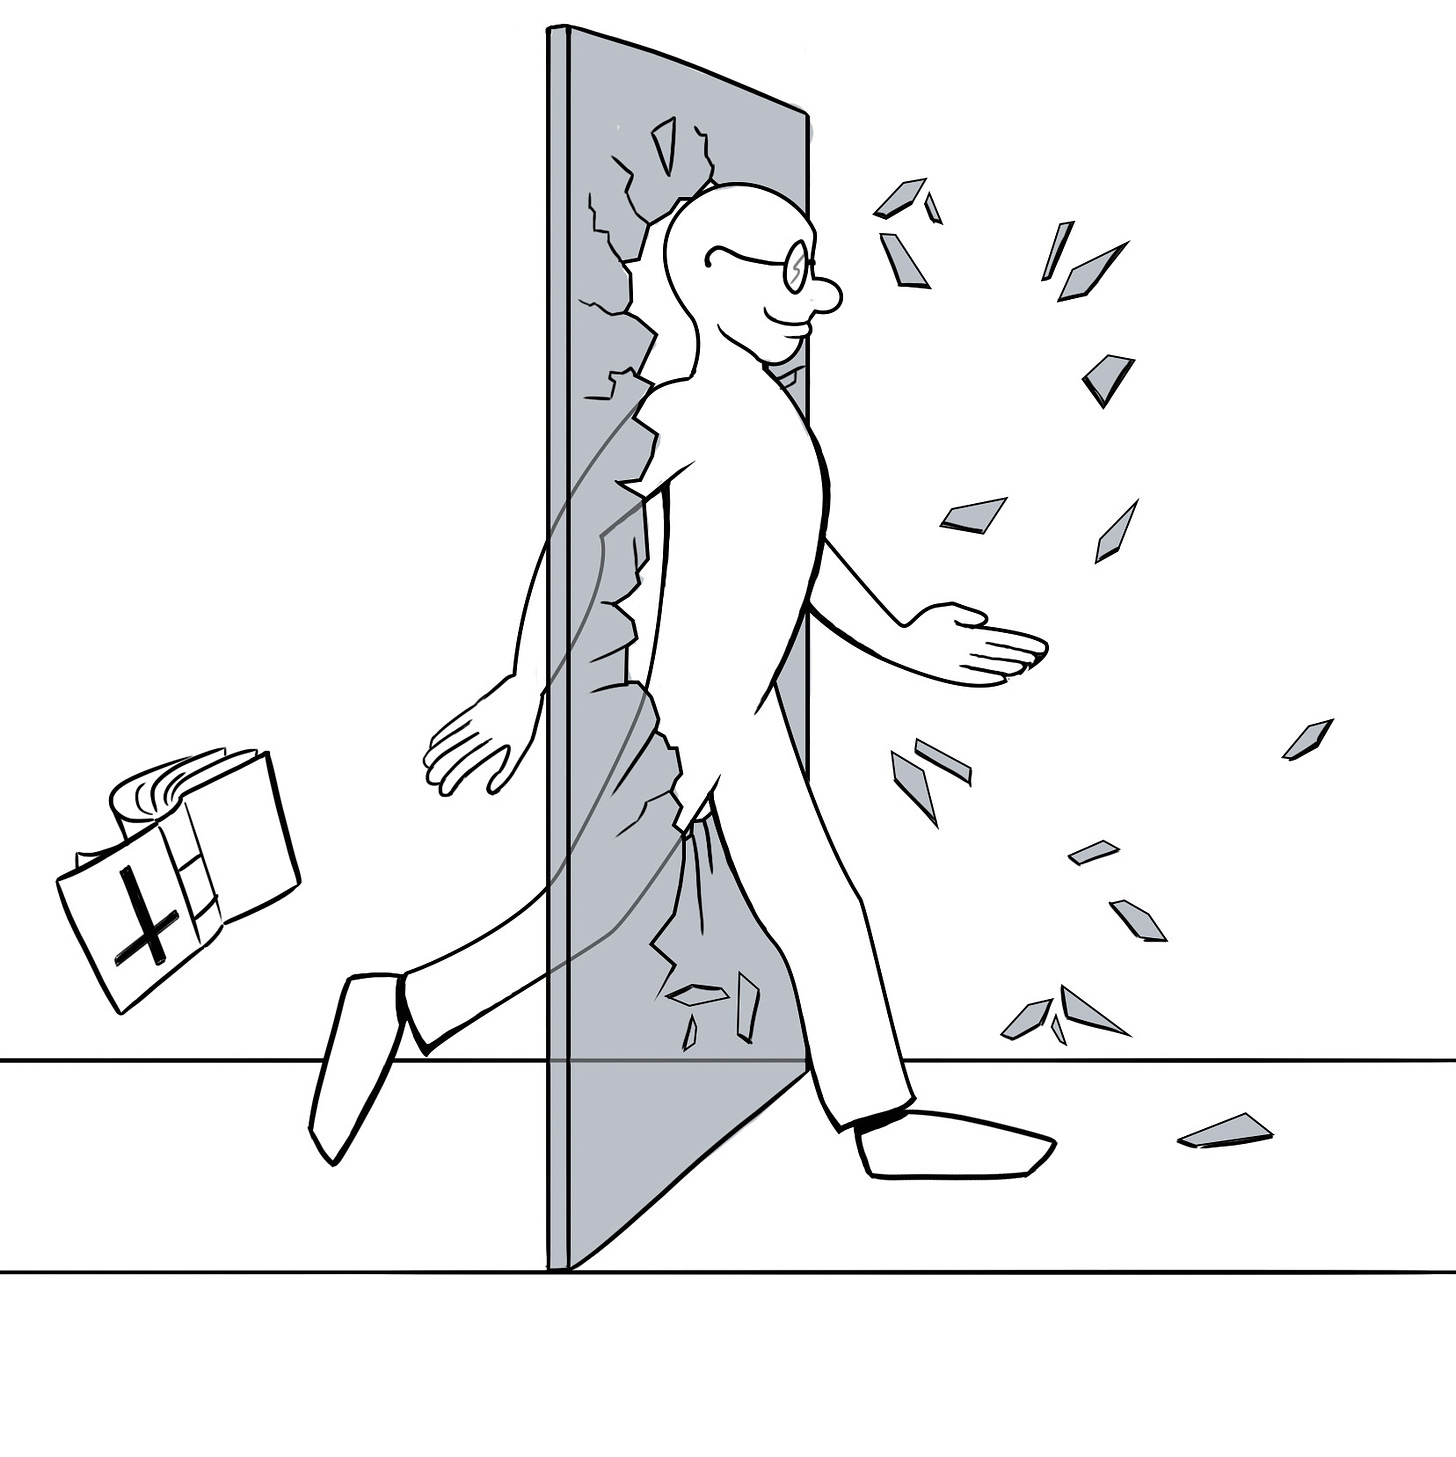 A drawing showing a man discarding a bible and  walking unscathed through glass.